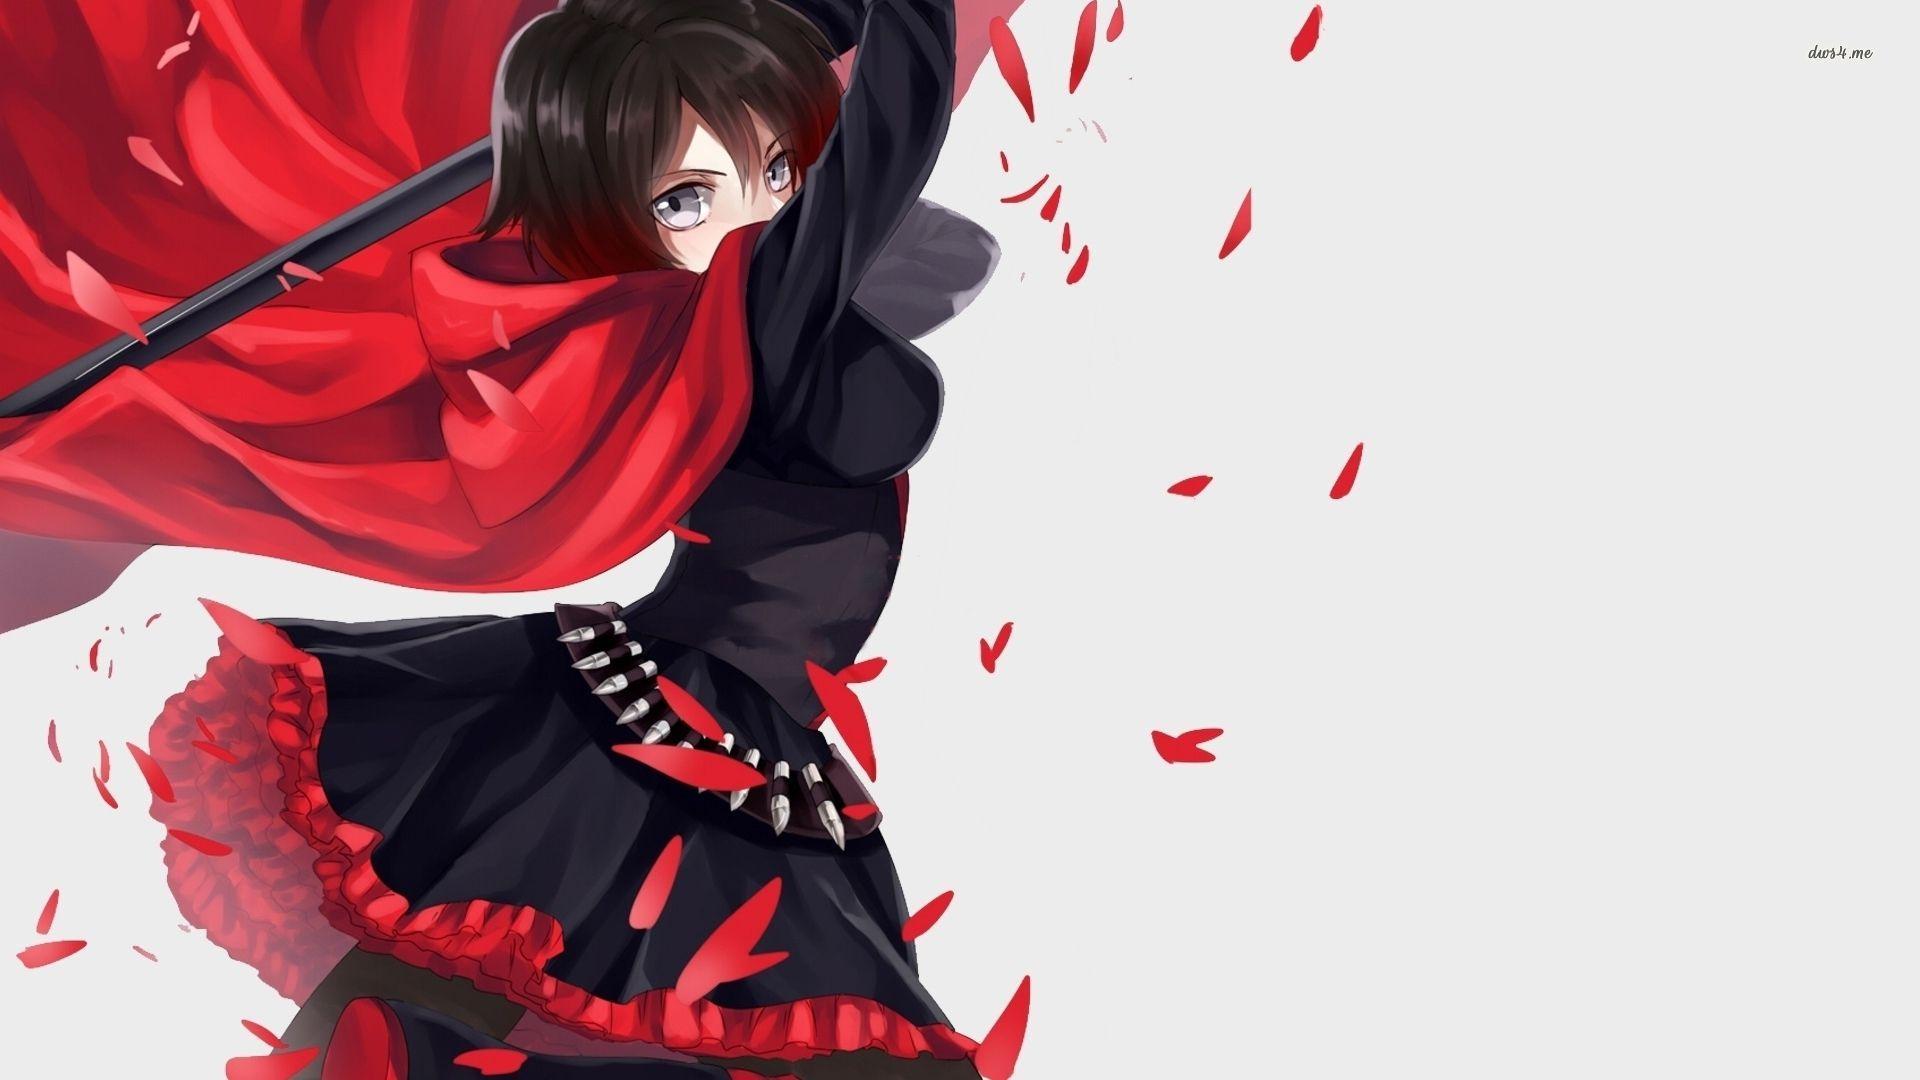 High Resolution Ruby Rose RWBY Wallpaper for Computer Full Size